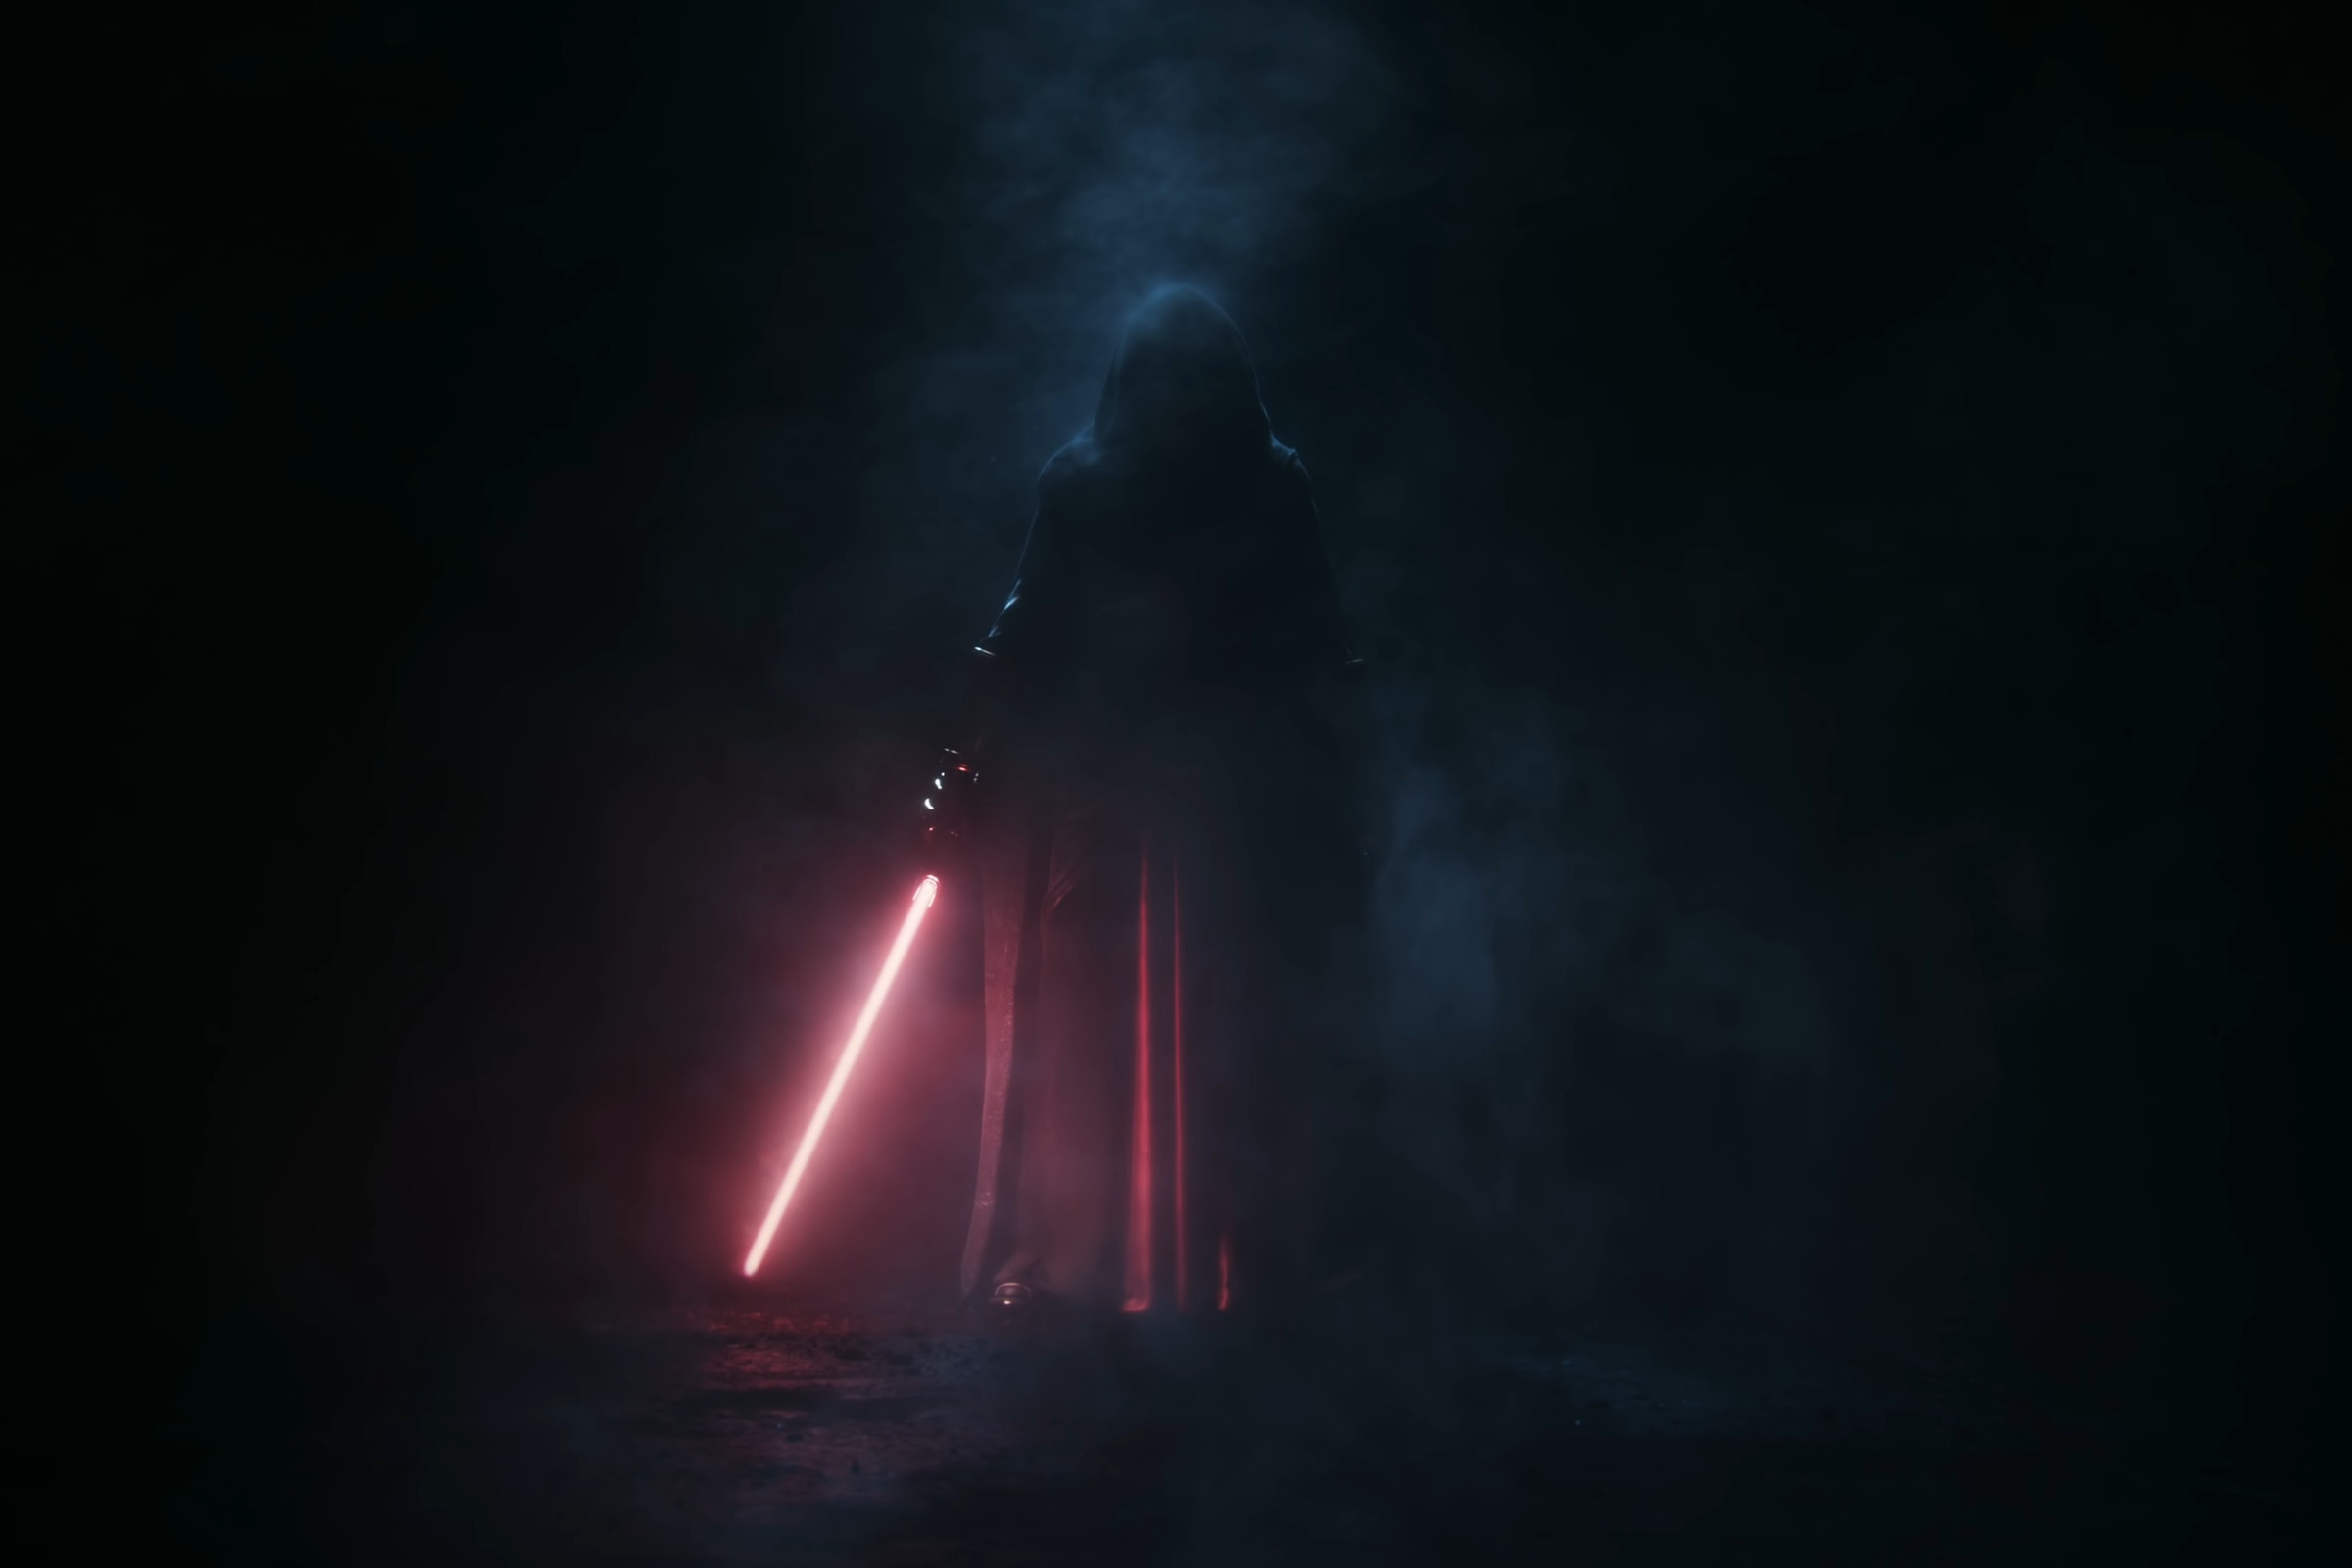 A cloaked figure wields a red lightsaber.